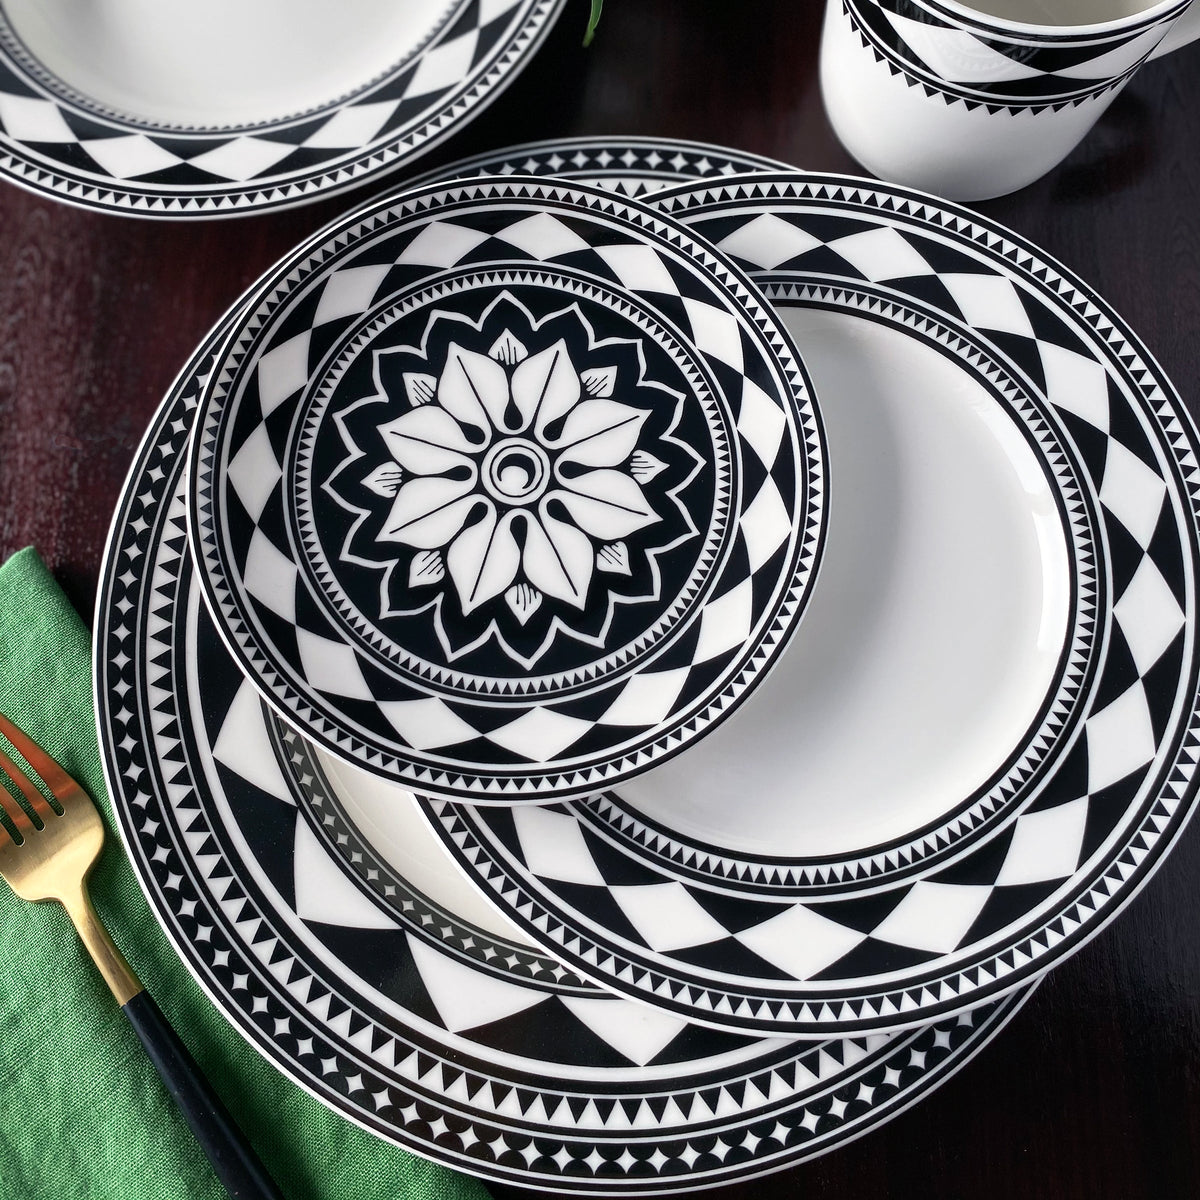 A set of Fez Salad Plates by Caskata Artisanal Home, with a bold geometric pattern, adding a global feel to the table.